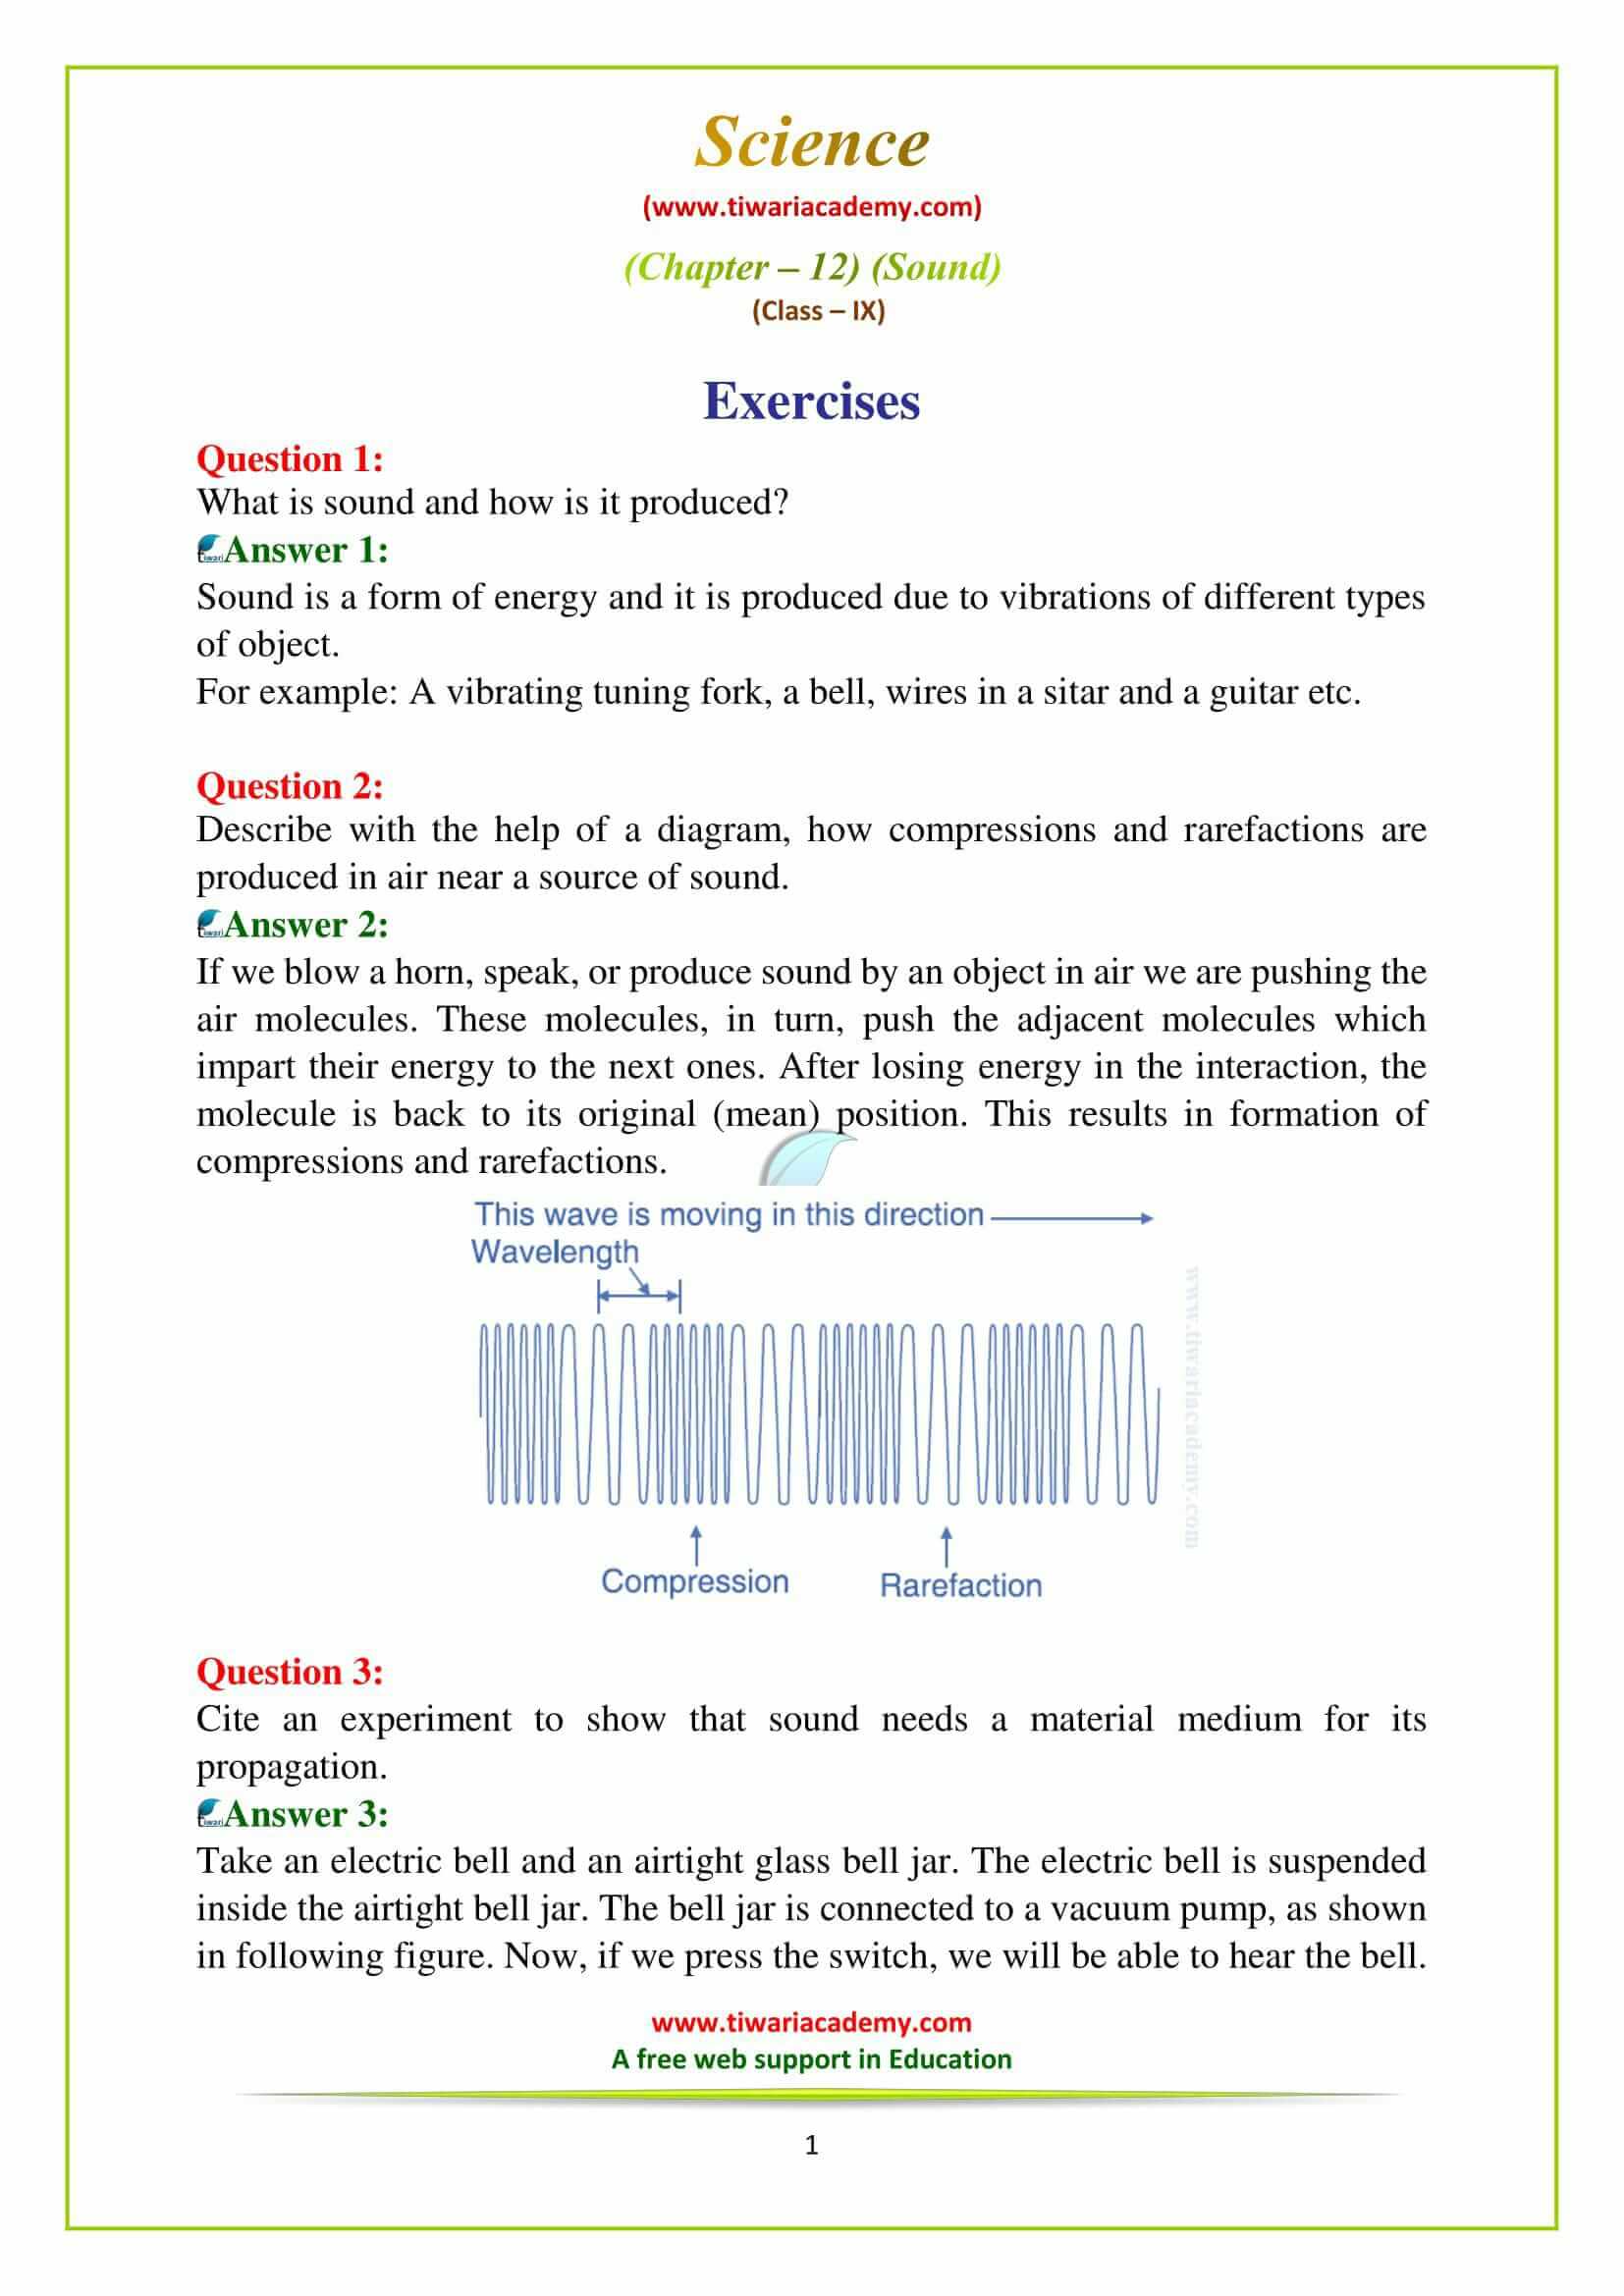 NCERT Solutions for Class 9 Science Chapter 12 Sound Exercises Question answers